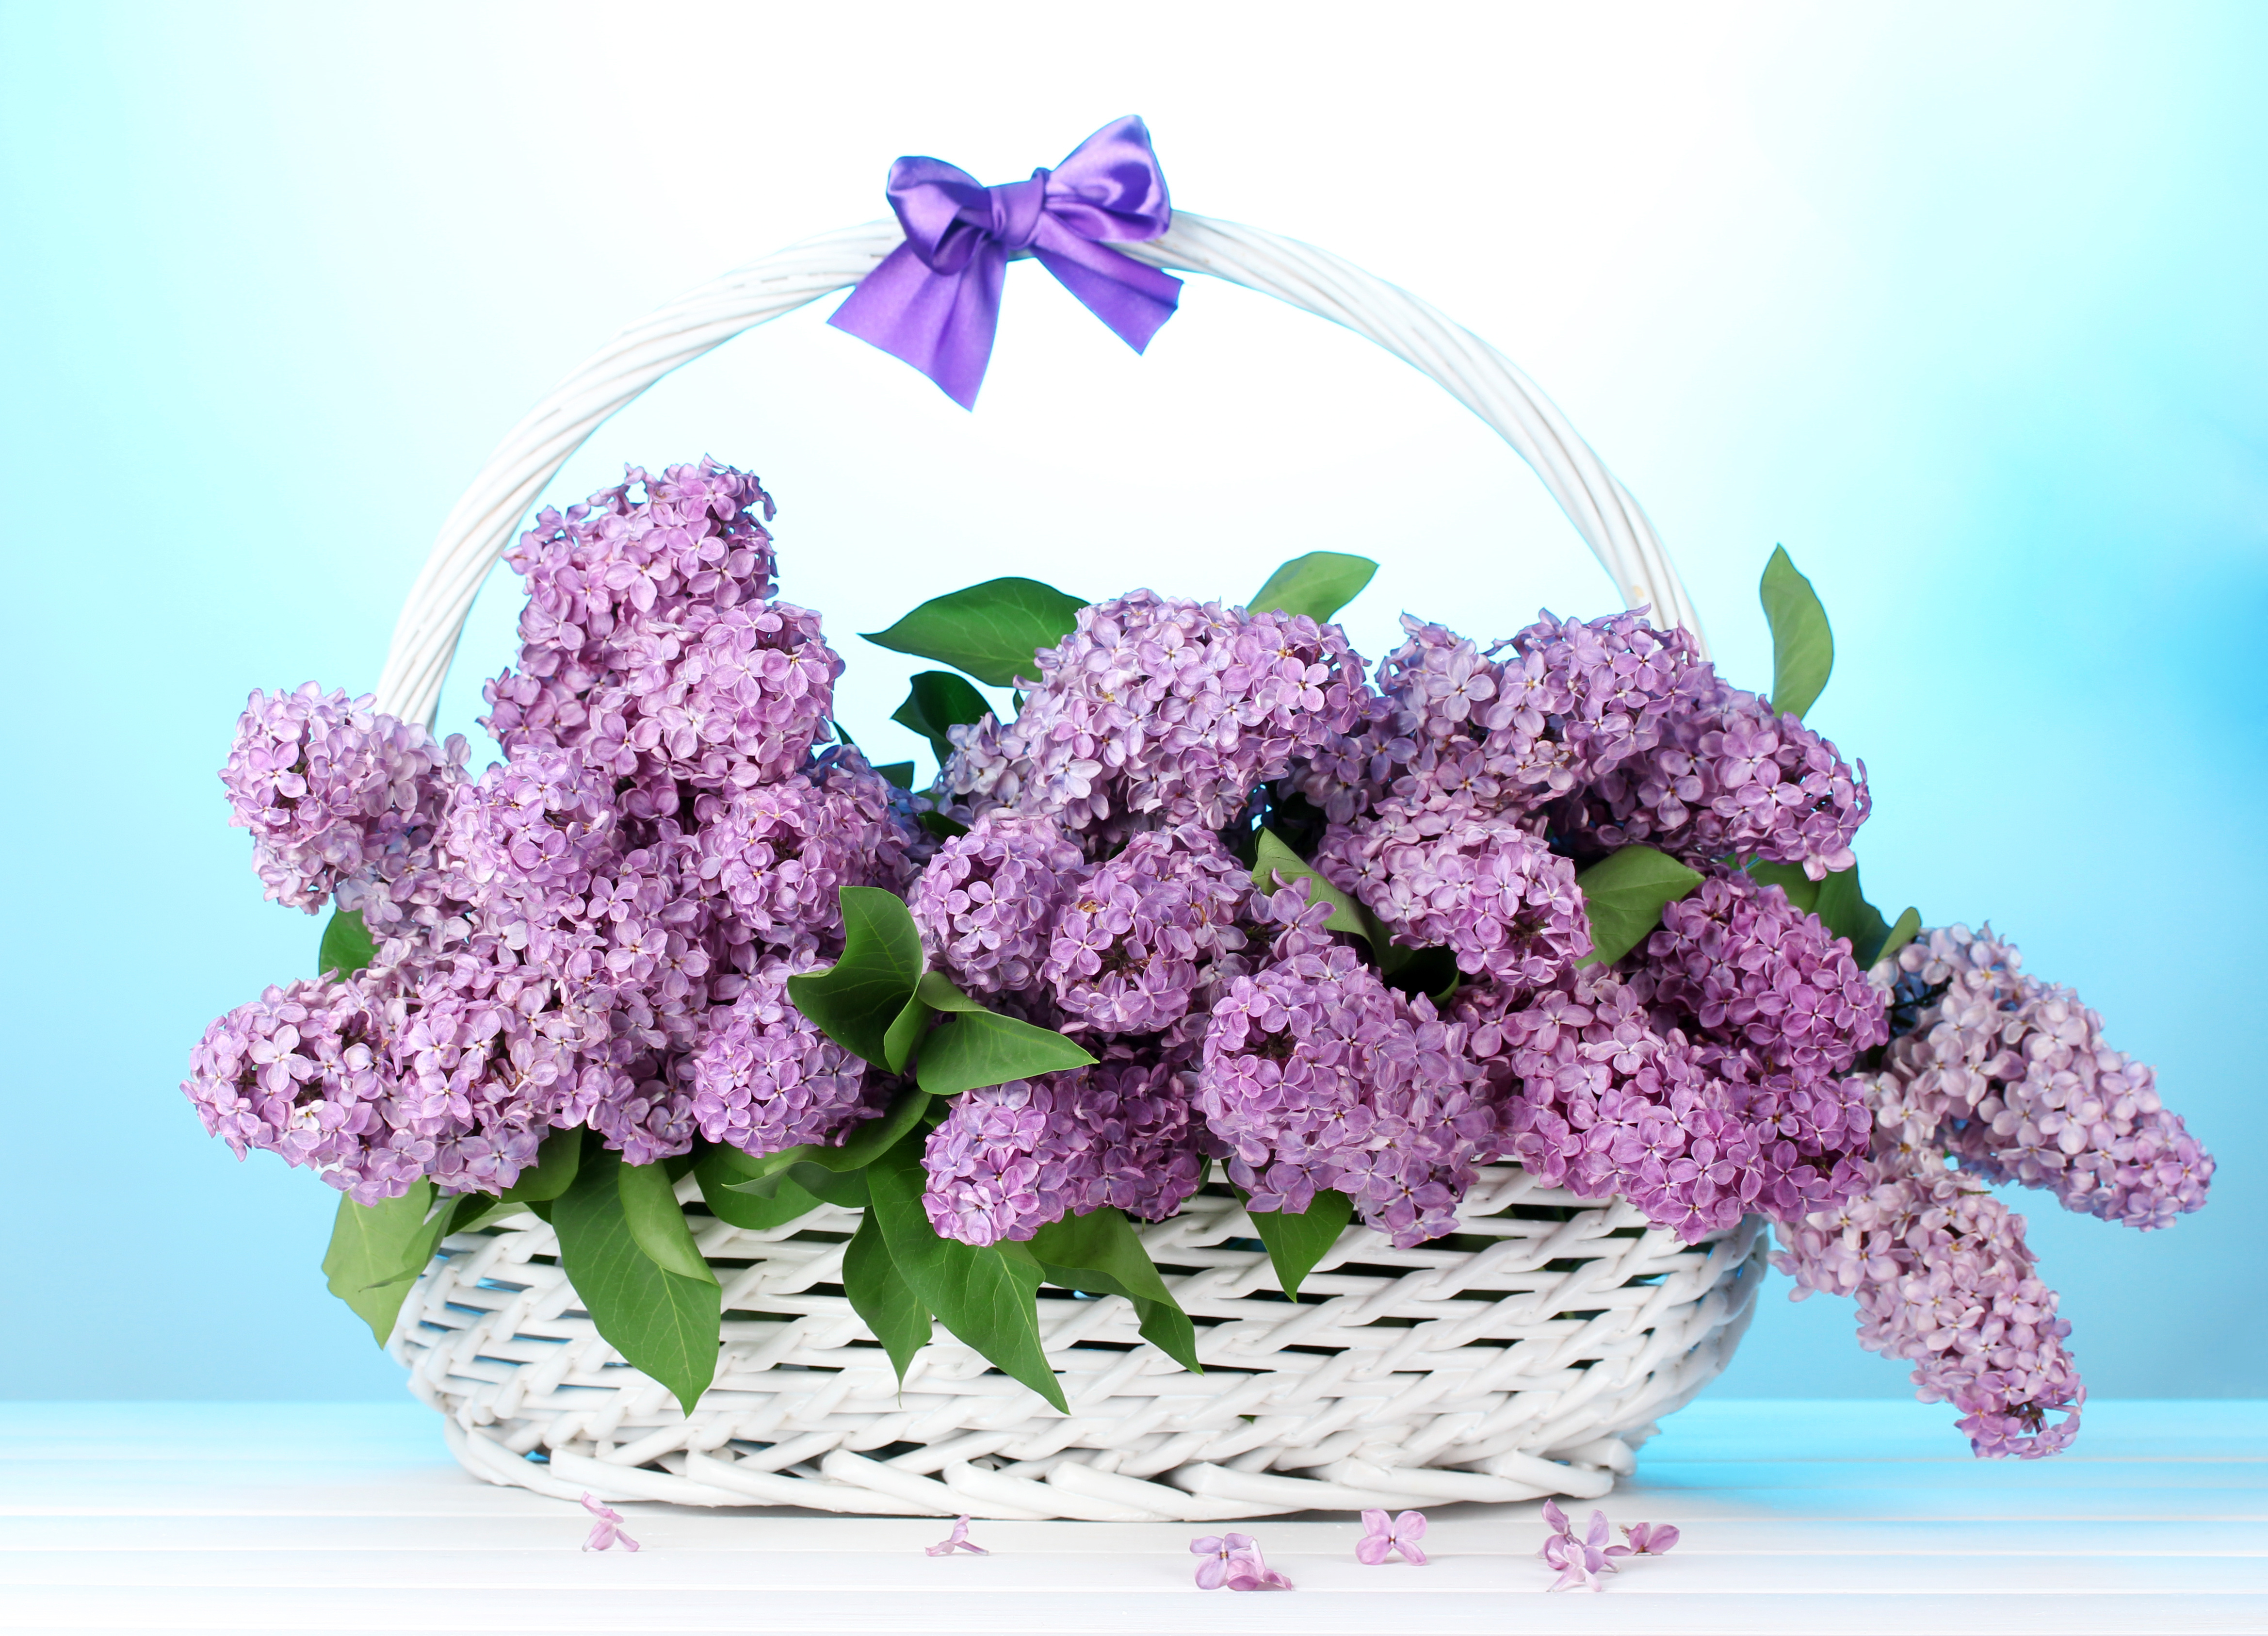 Wallpaper lilac flowers basket bow bunch wallpapers flowers